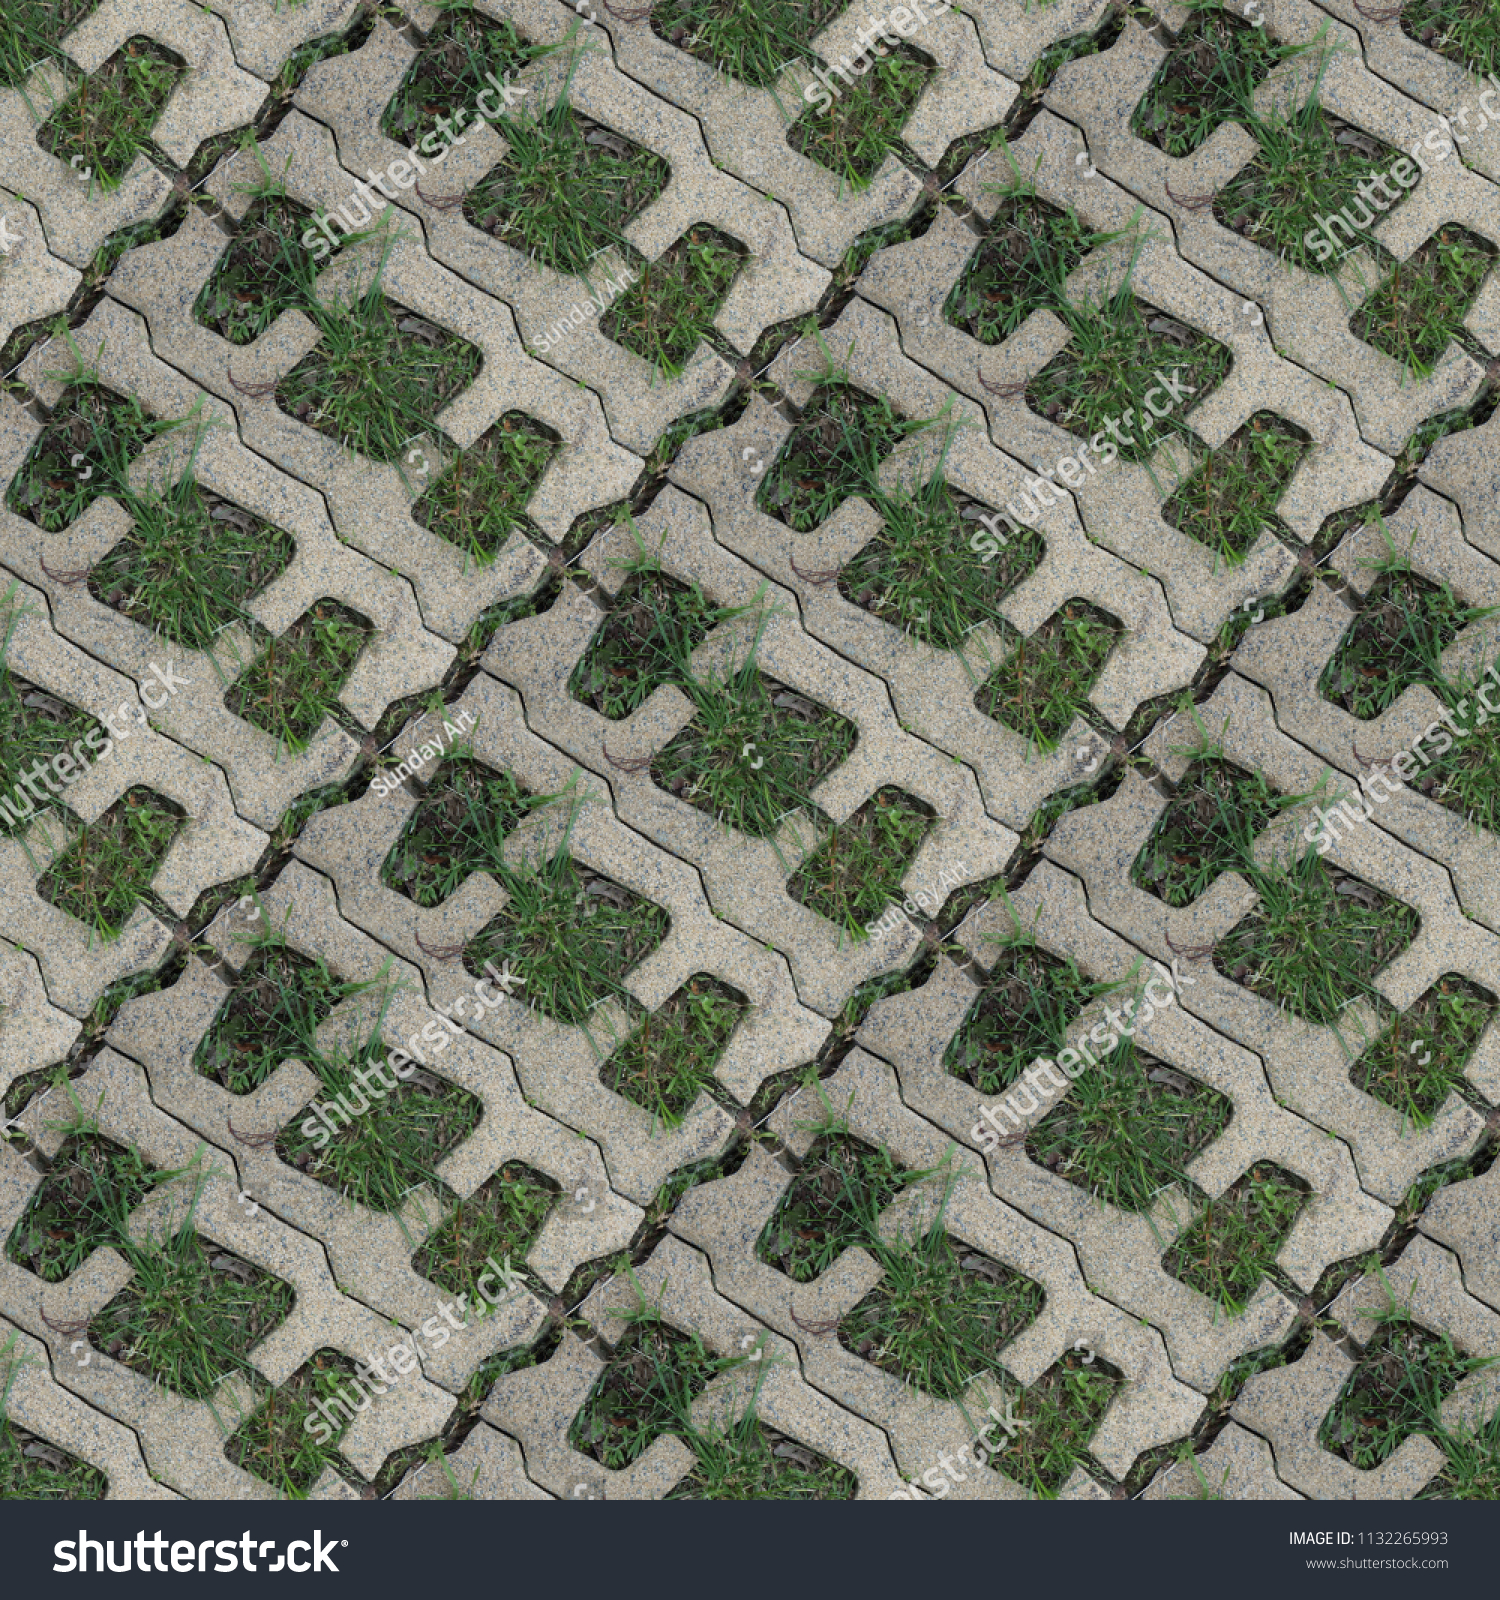 Seamless pattern with stone blocks of the original form on a park path covered and green grass #1132265993